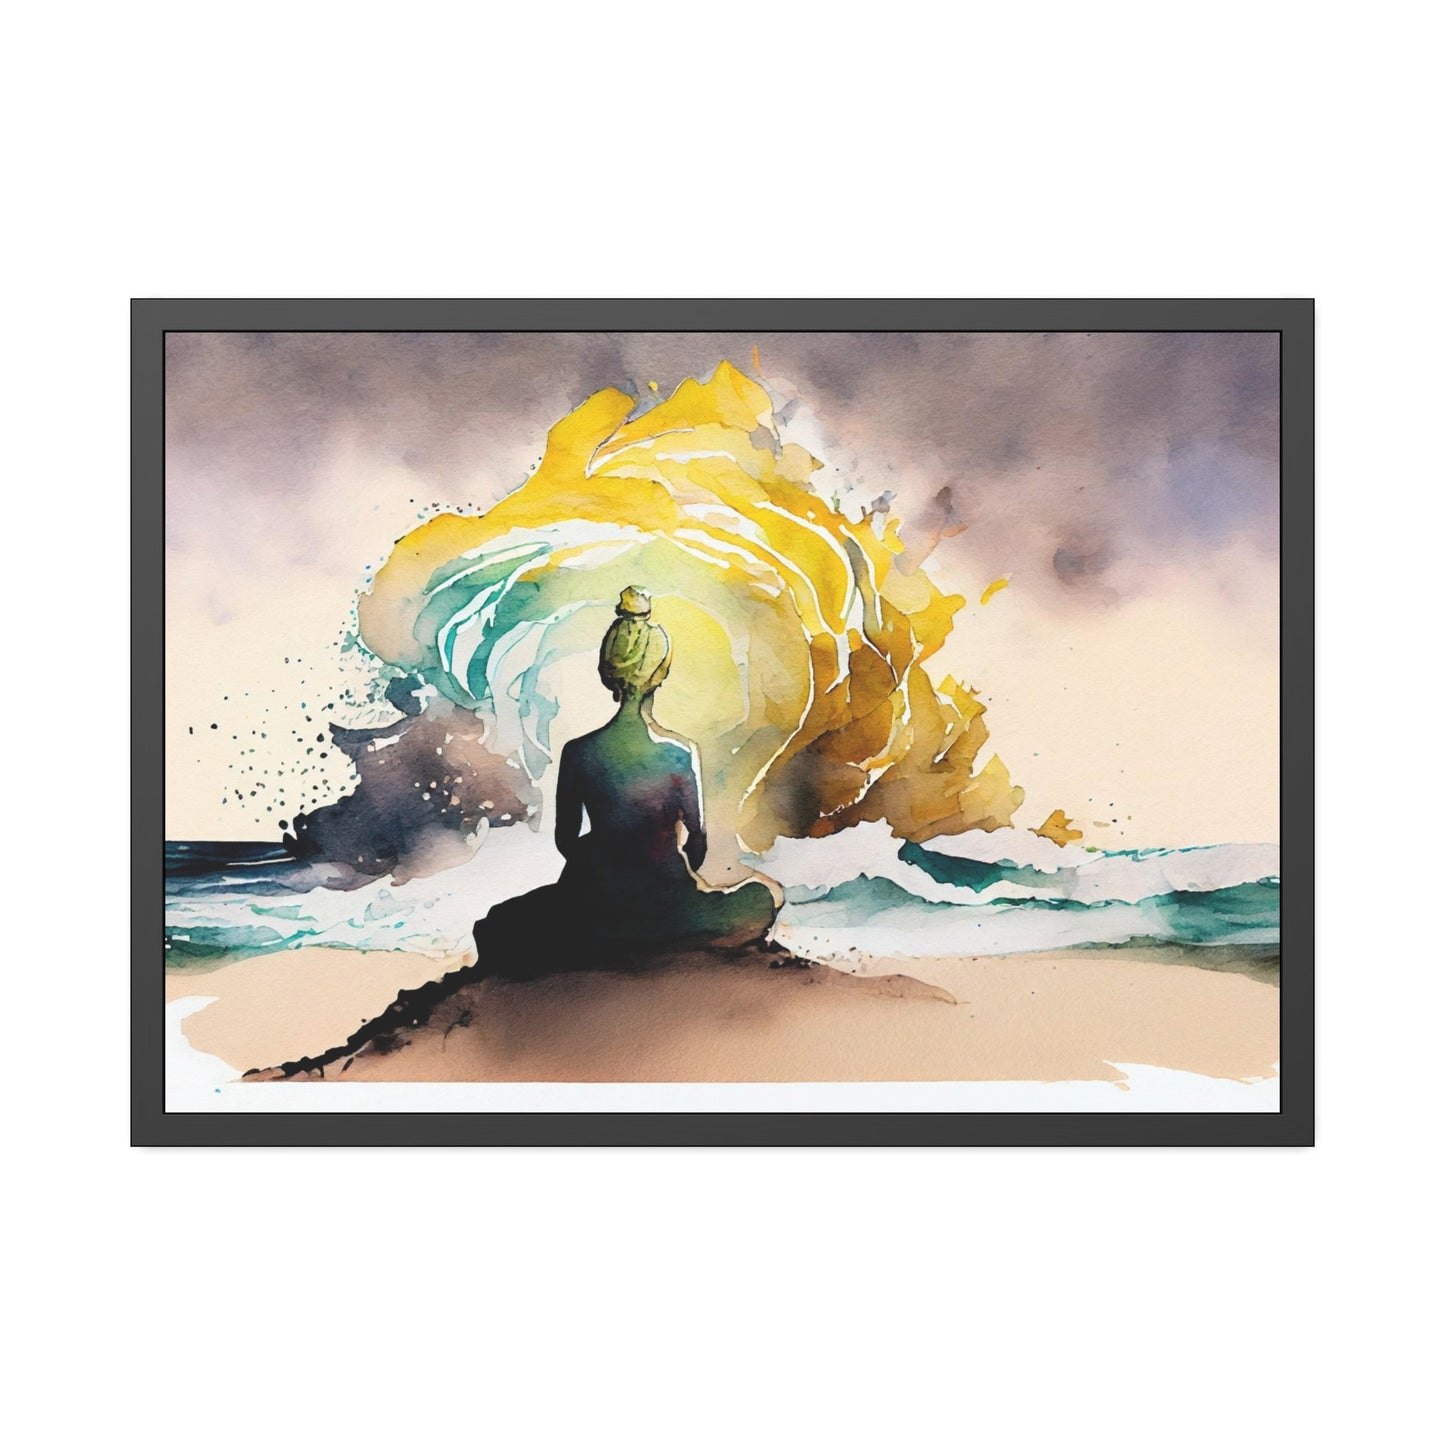 Clear Your Mind: Artistic Framed Canvas for a Relaxing Escape